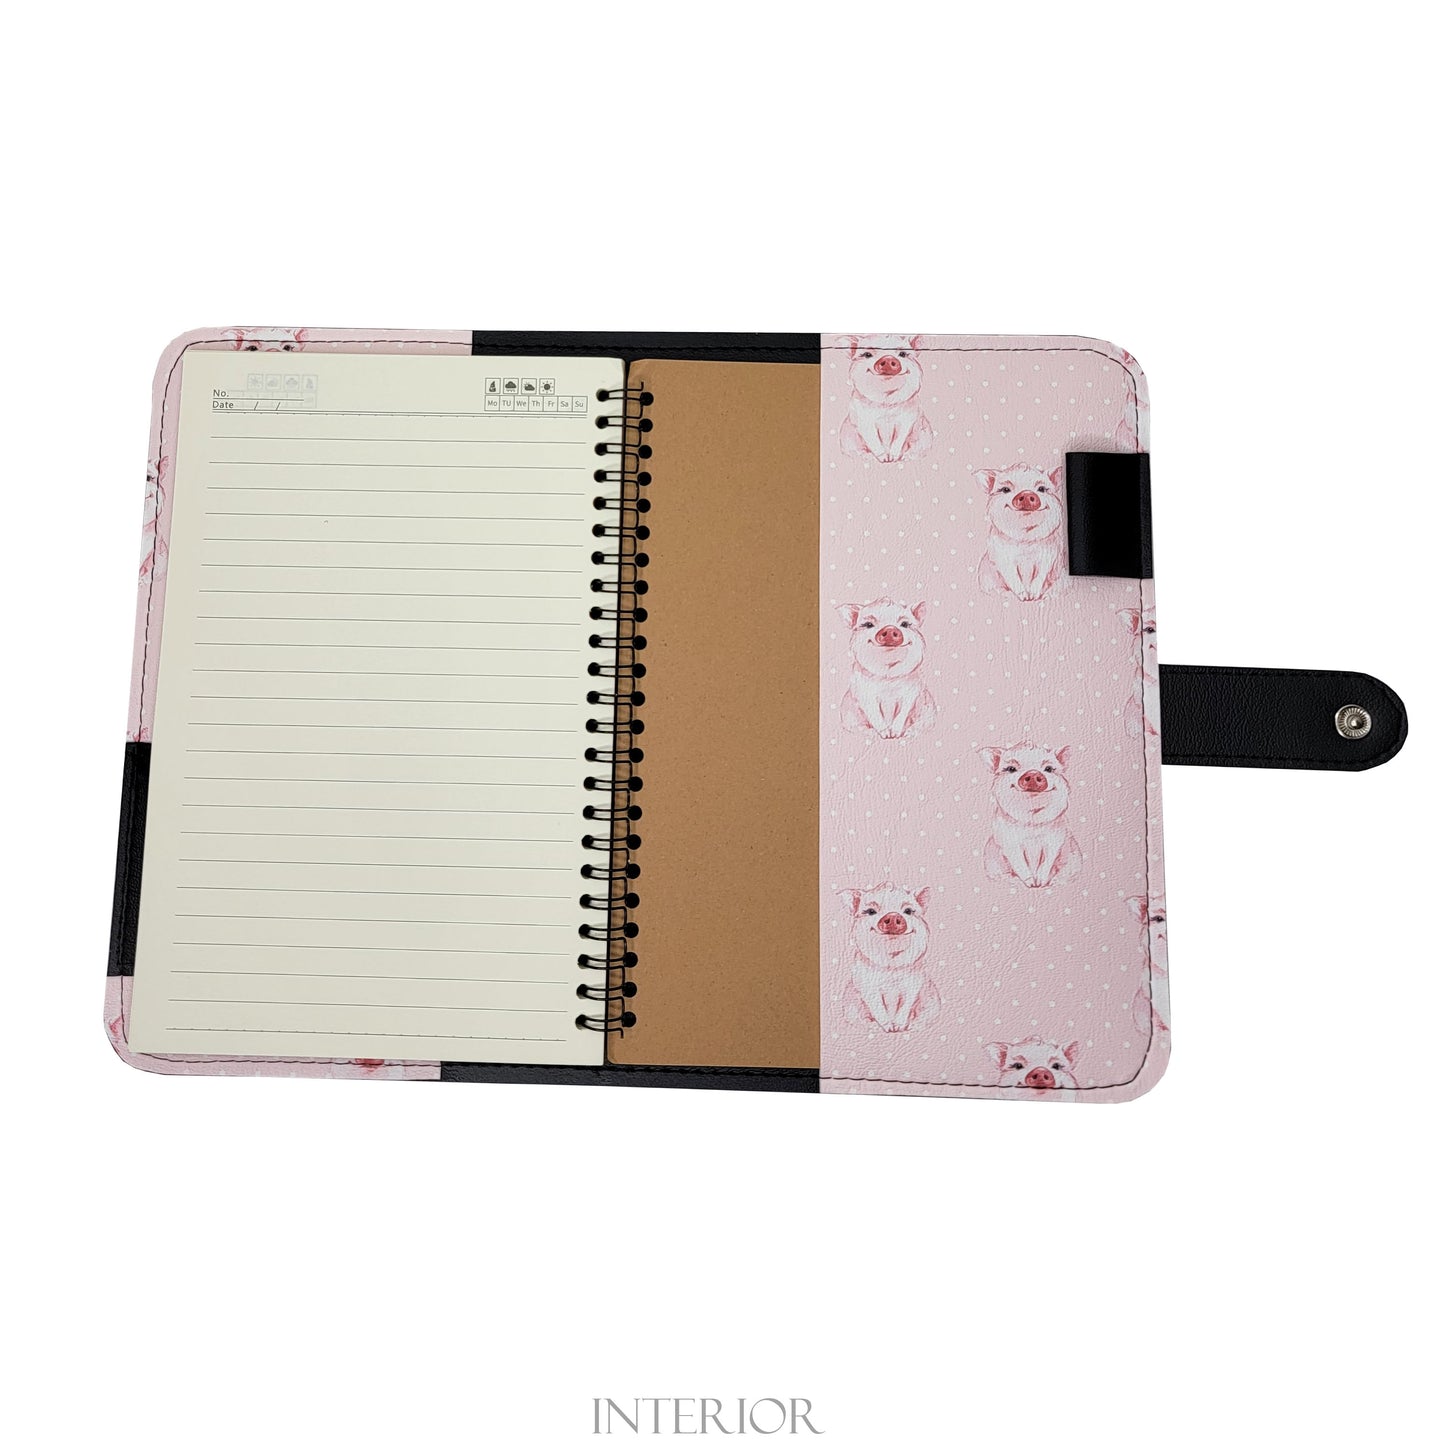 Pigs & Polka Dots- Notebook & Cover